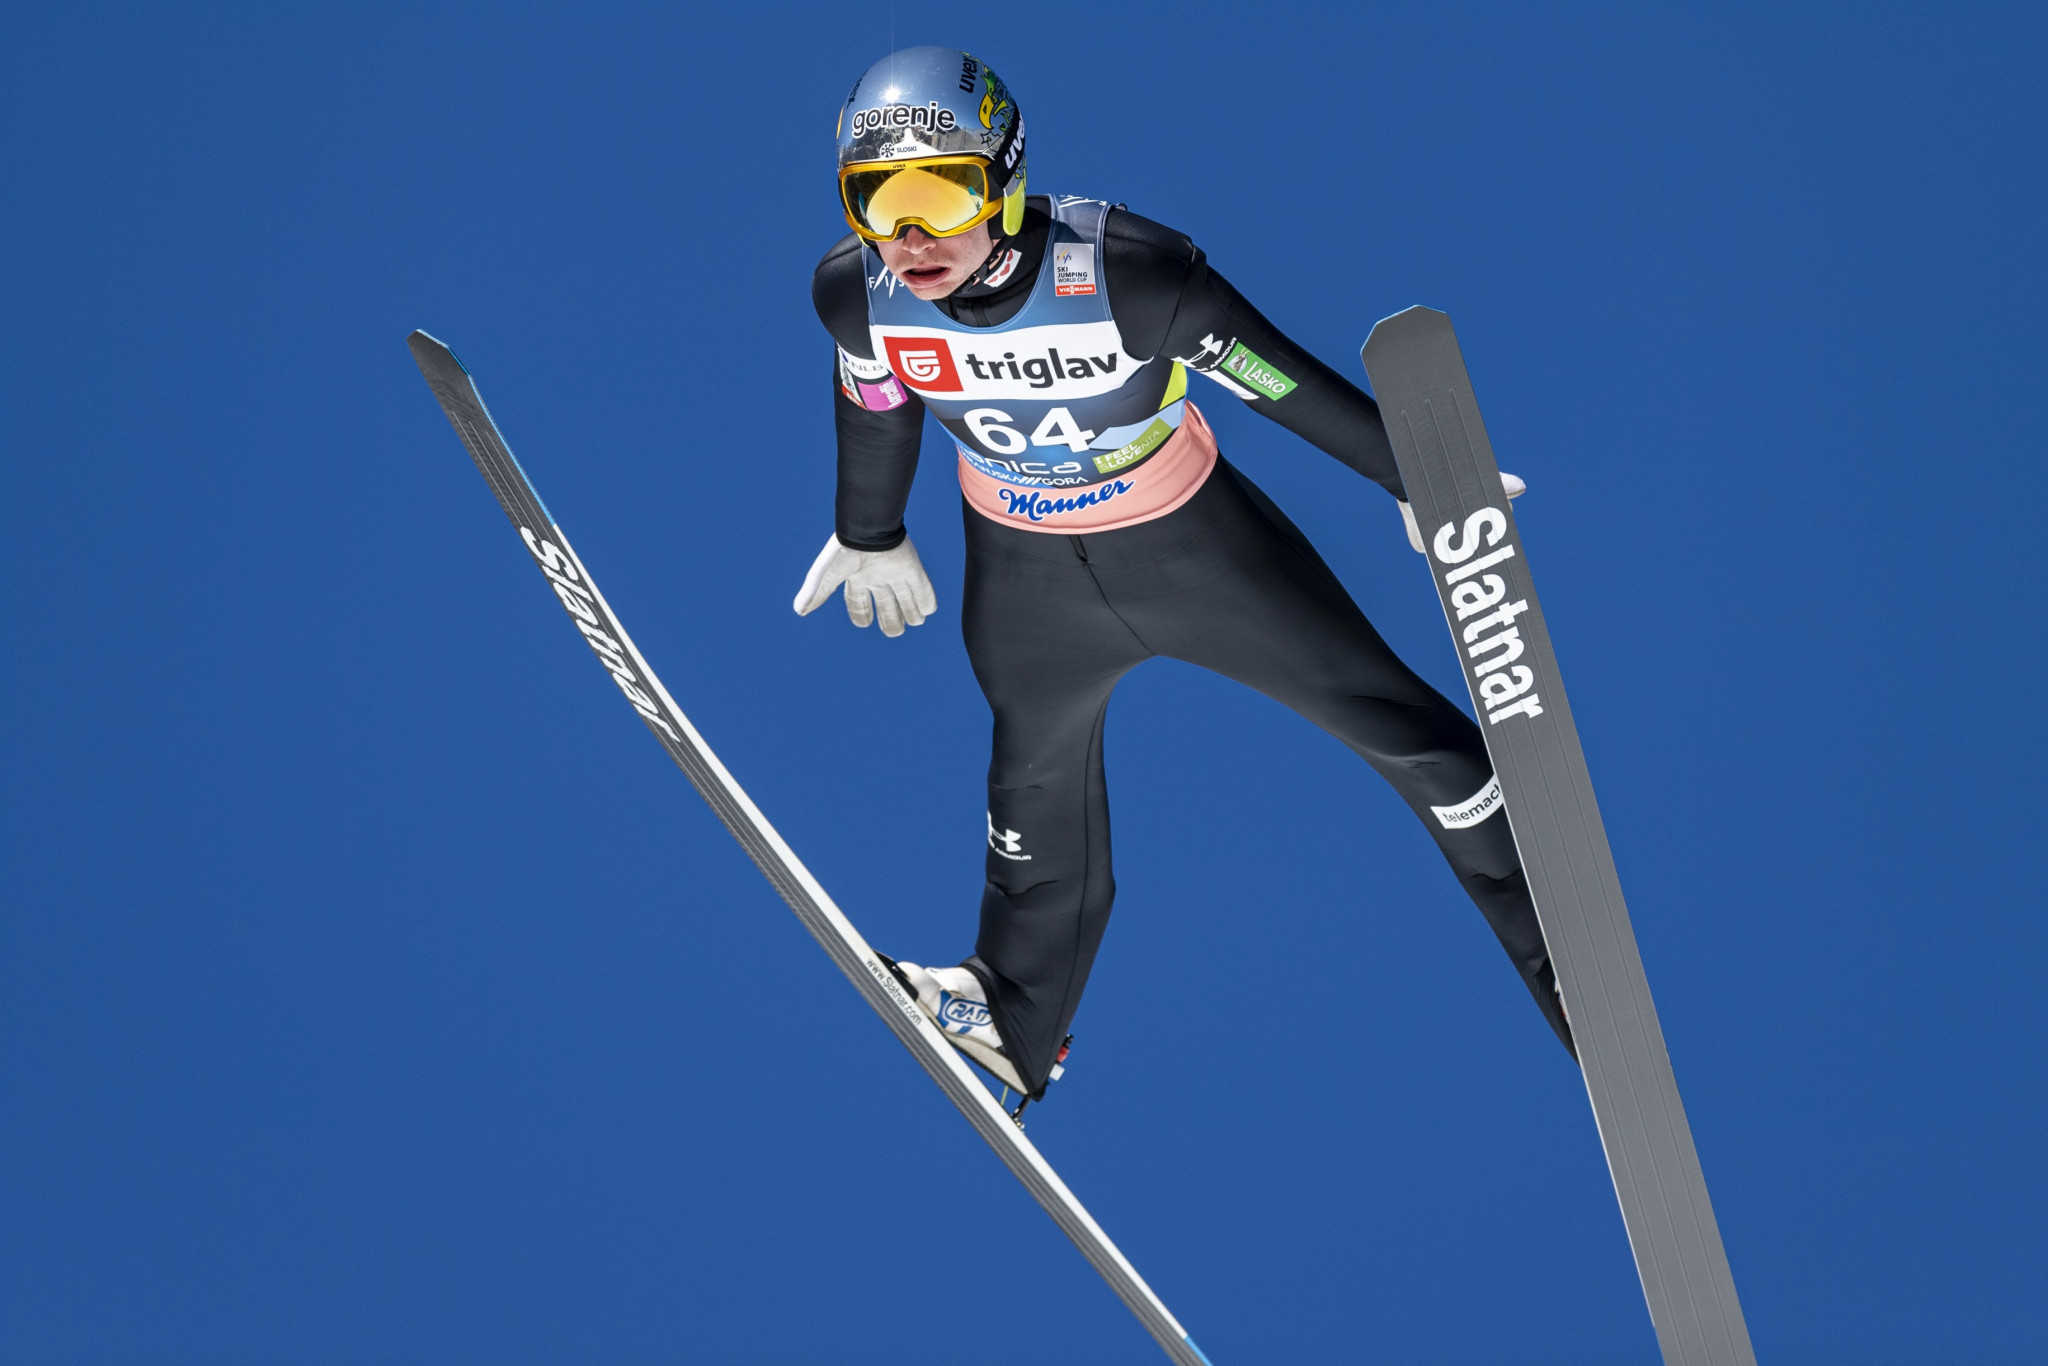 Lanišek heads Slovenian one-two at Planica FIS Ski Jumping World Cup